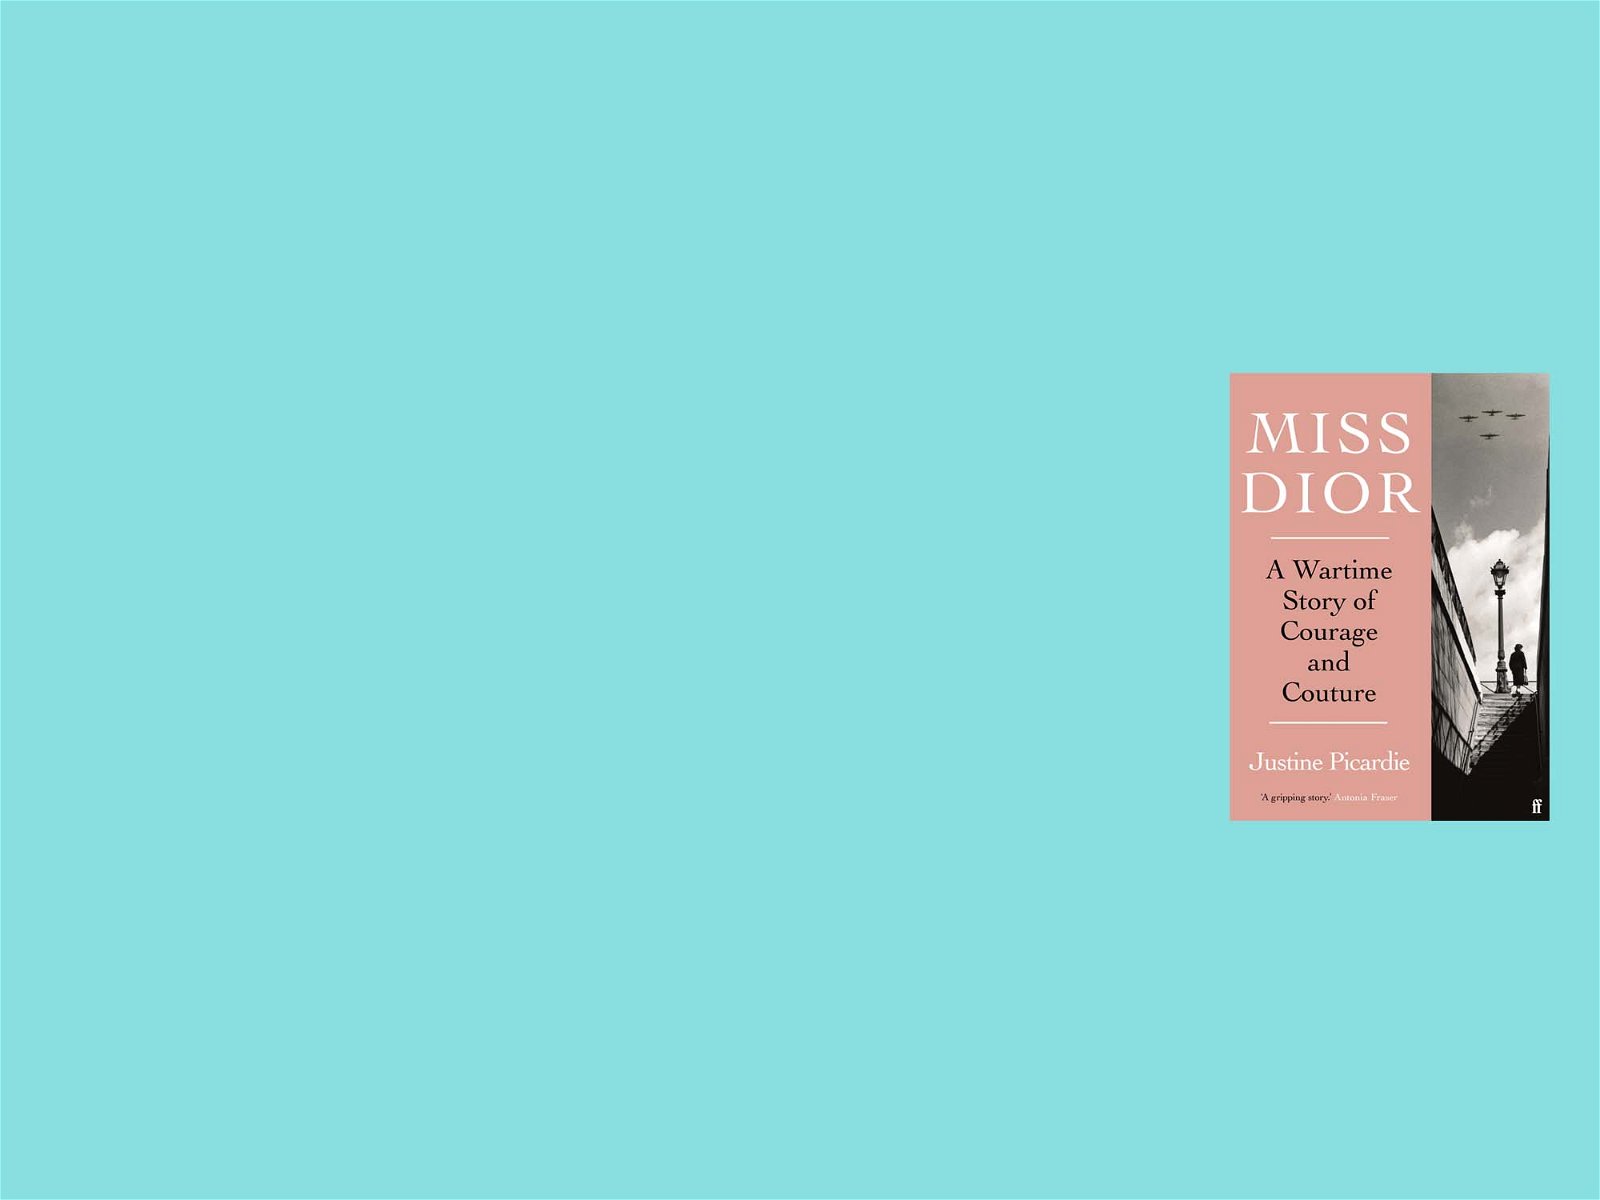 Read an Exclusive Excerpt from Justine Picardie's New Book, 'Miss